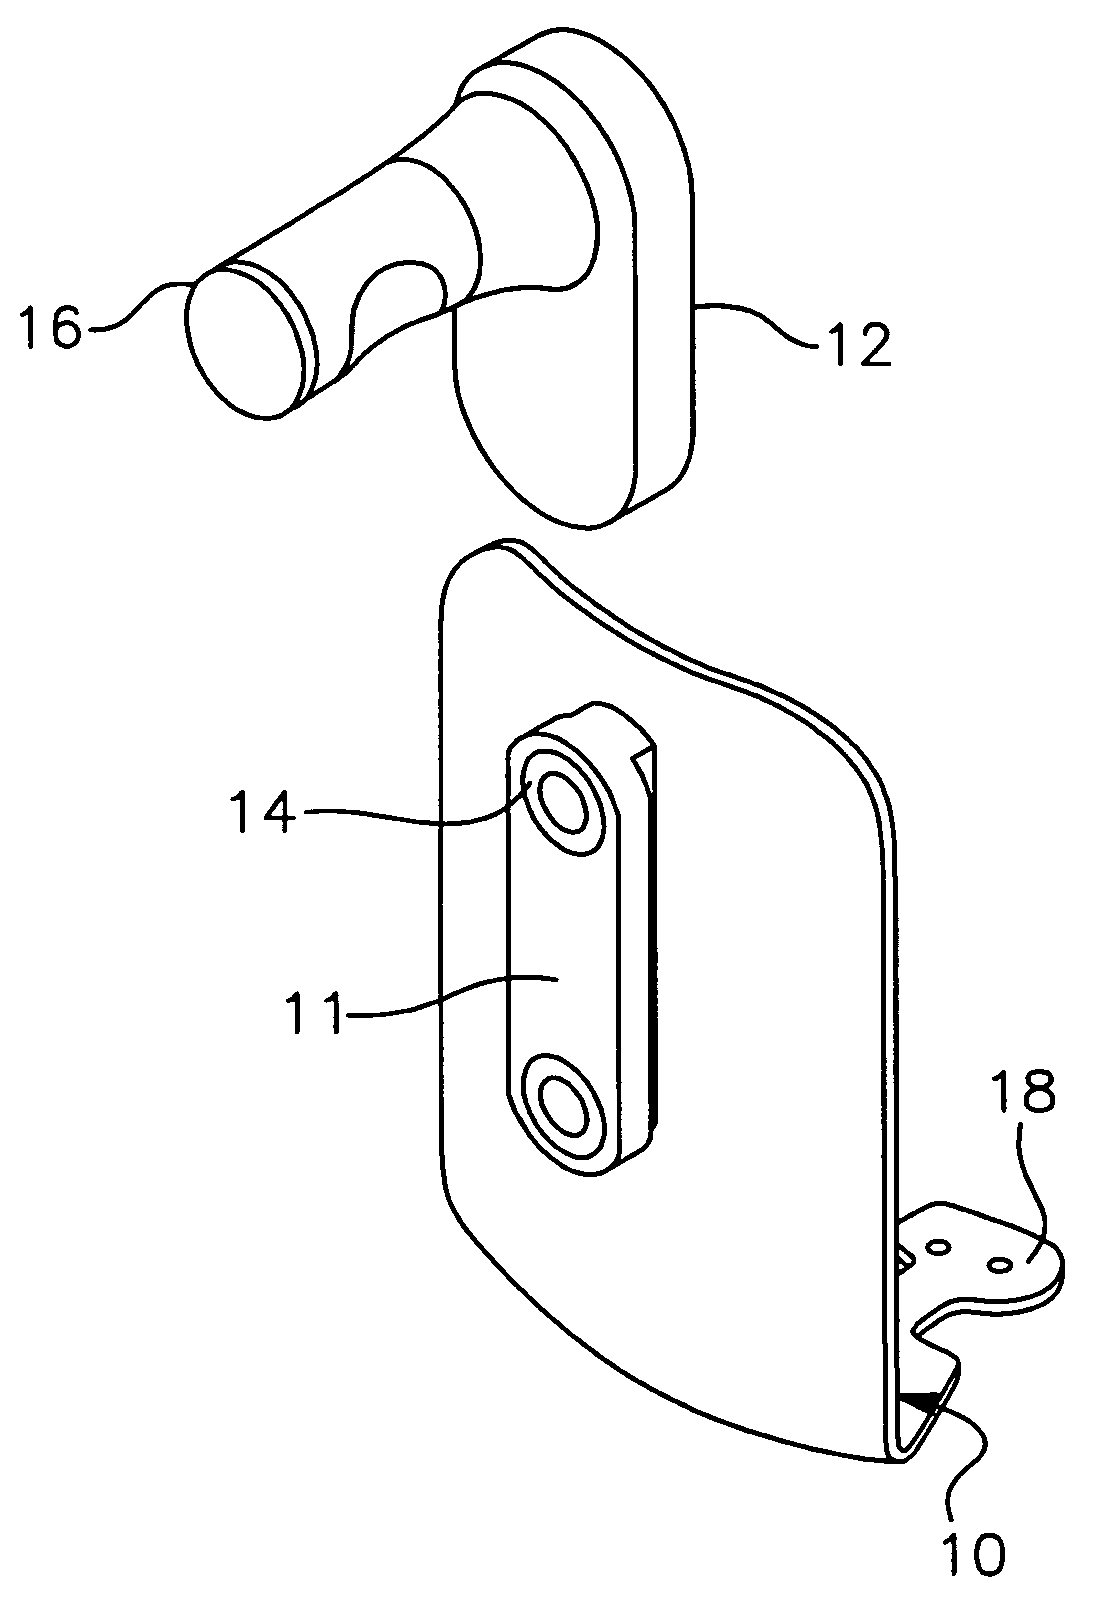 Footwear integrated strapless spur system